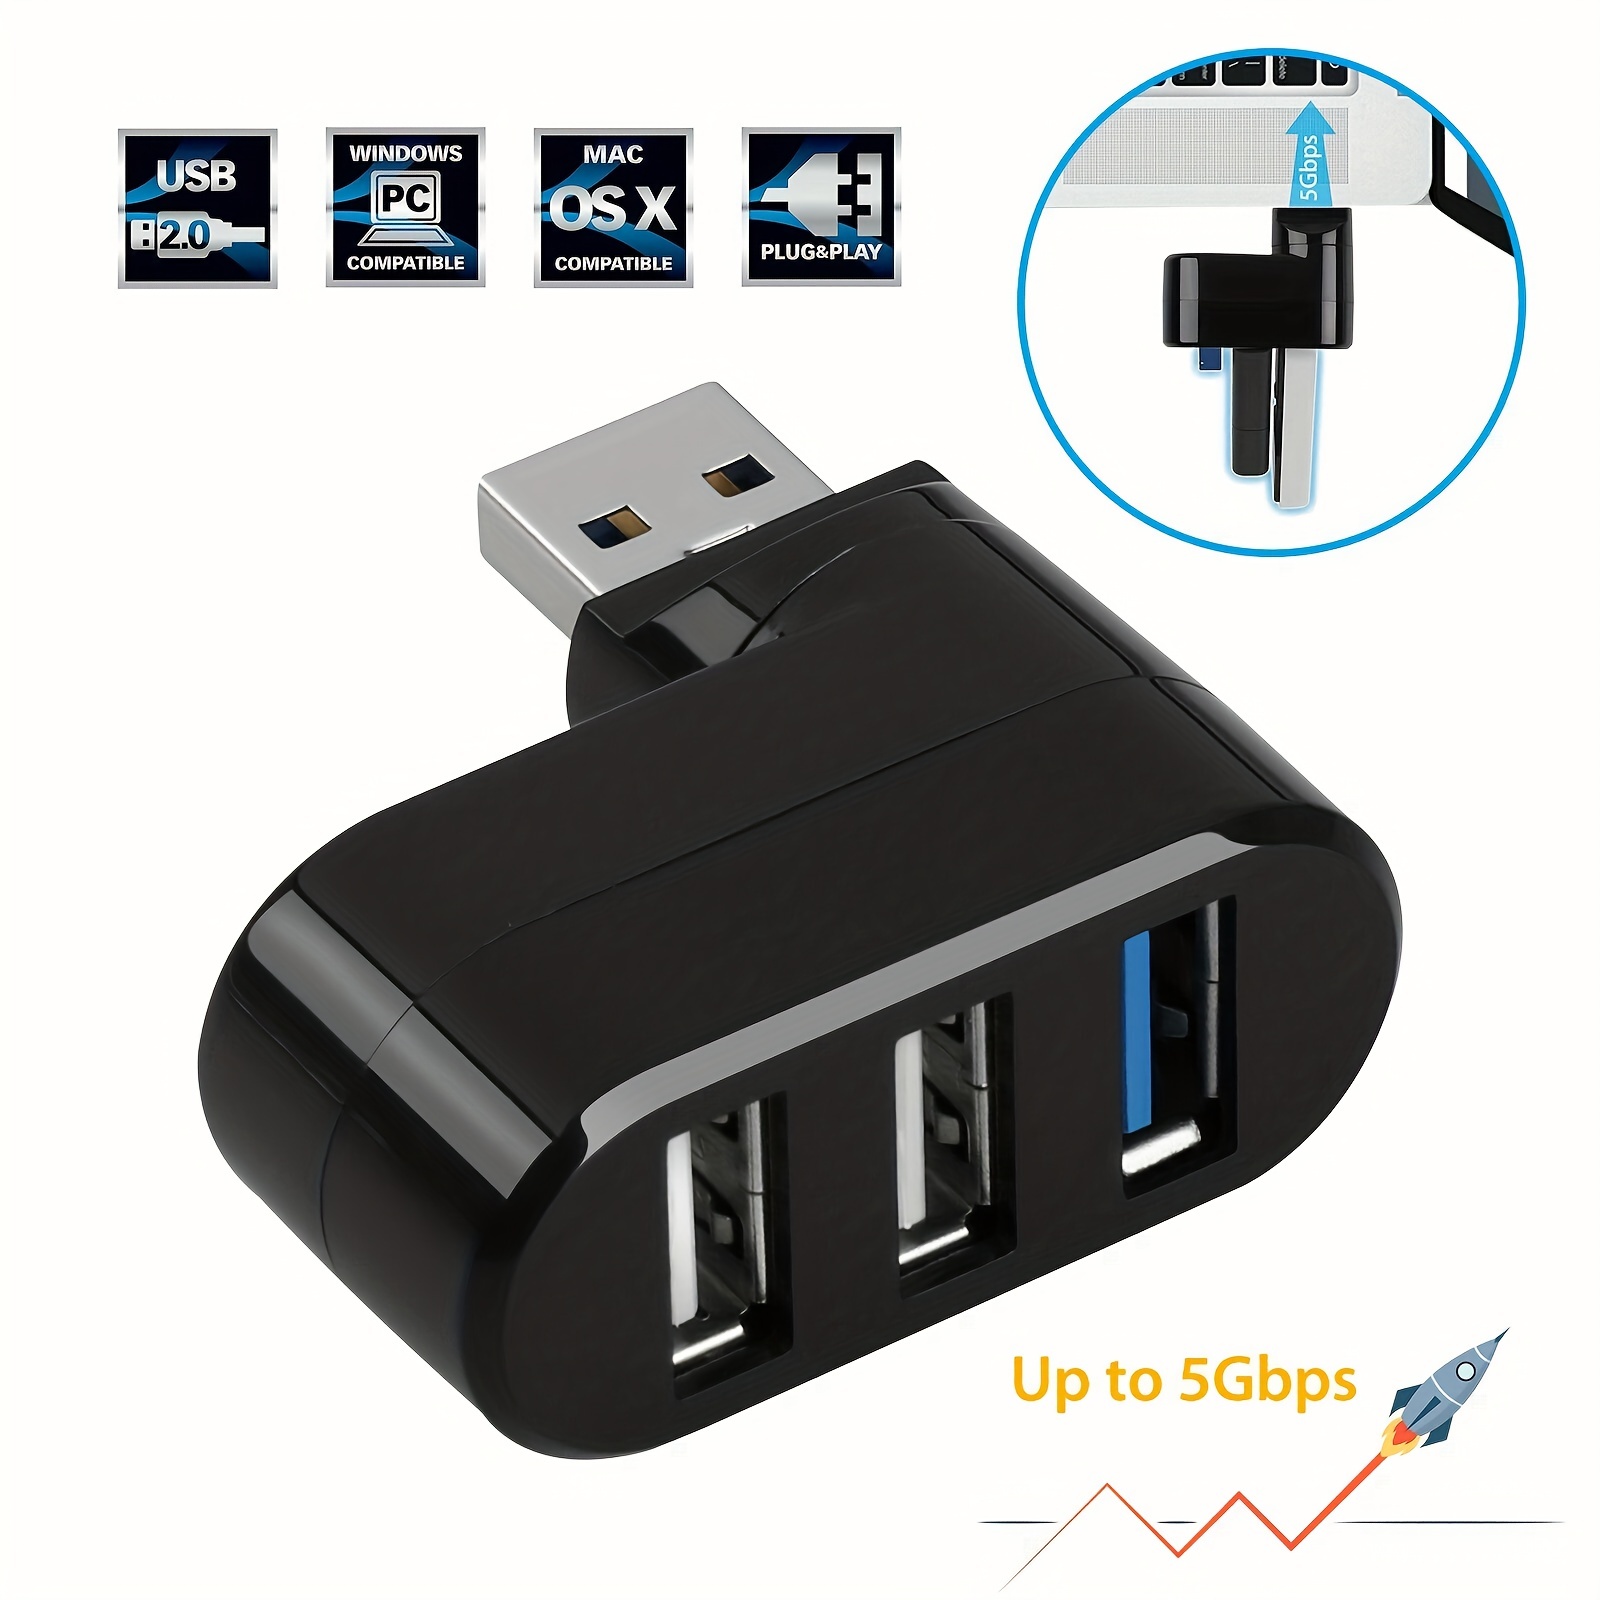 USB hub, Aluminum USB 3.0 Data Hub with Individual On/Off Switches and LED  Lights for Laptop, PC, Computer (4ft/120cm) (7port) 